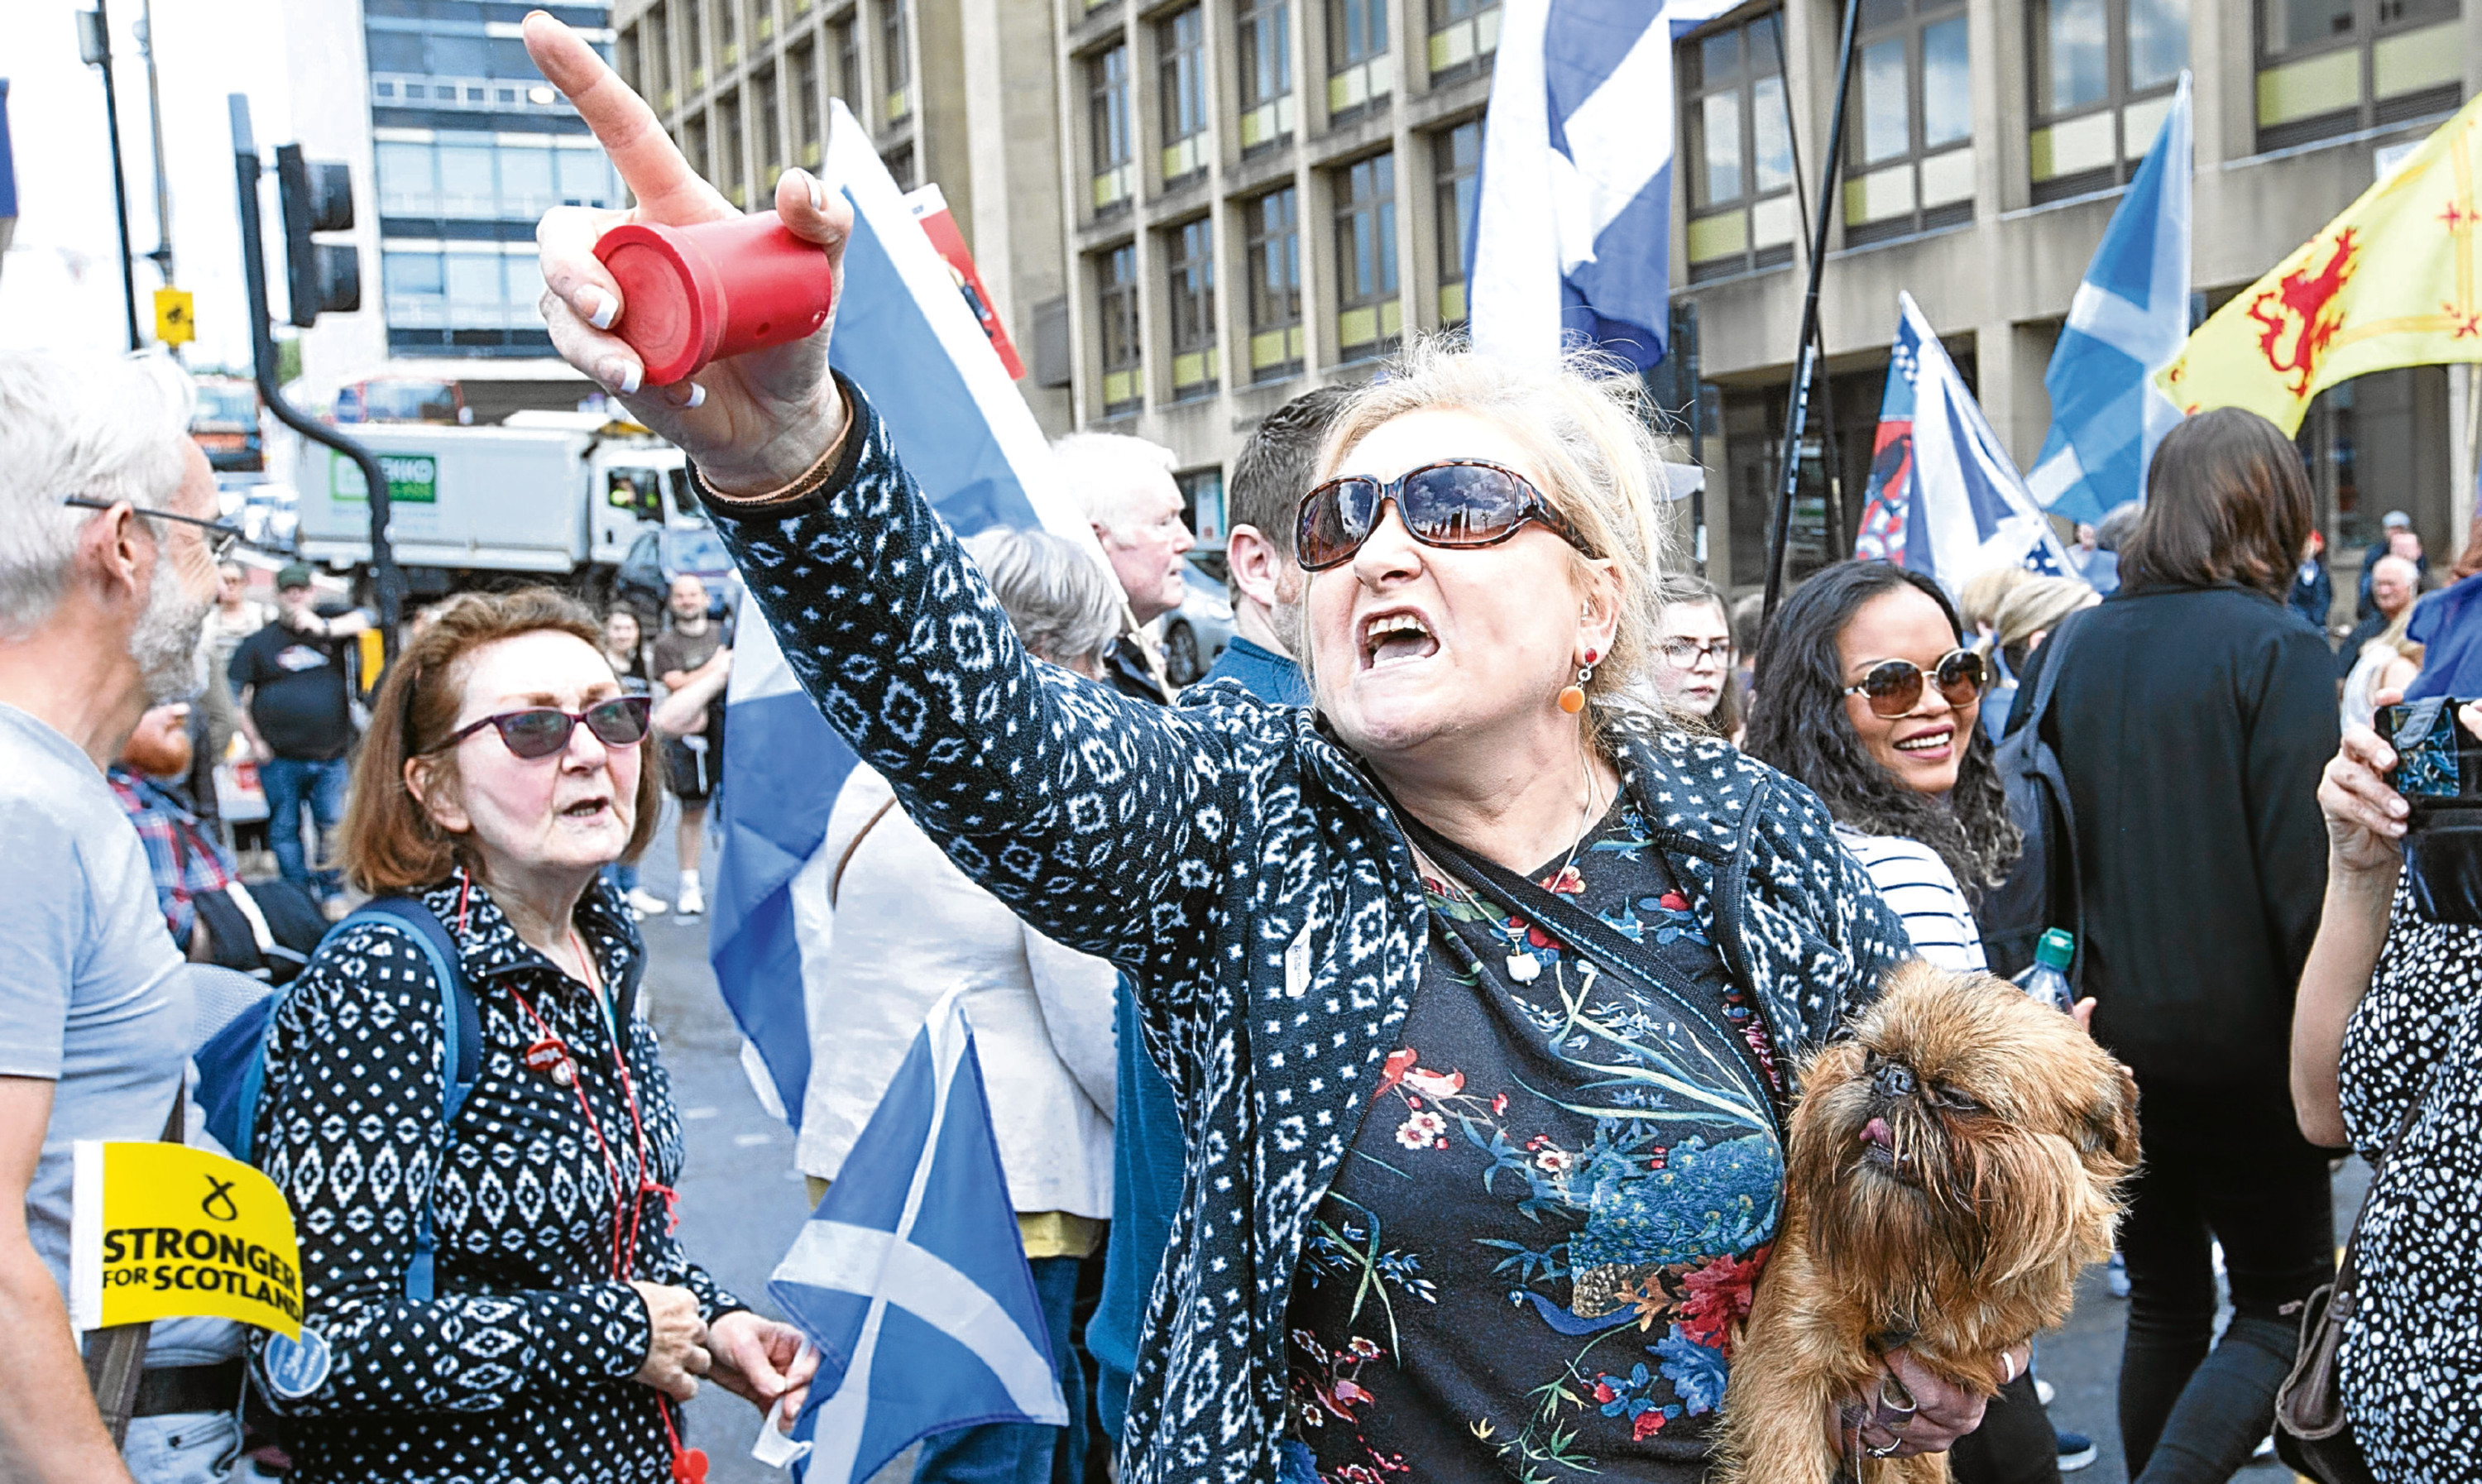 A woman gestures as Saturday’s March for Independence is met by counter demonstrators in Glasgow.